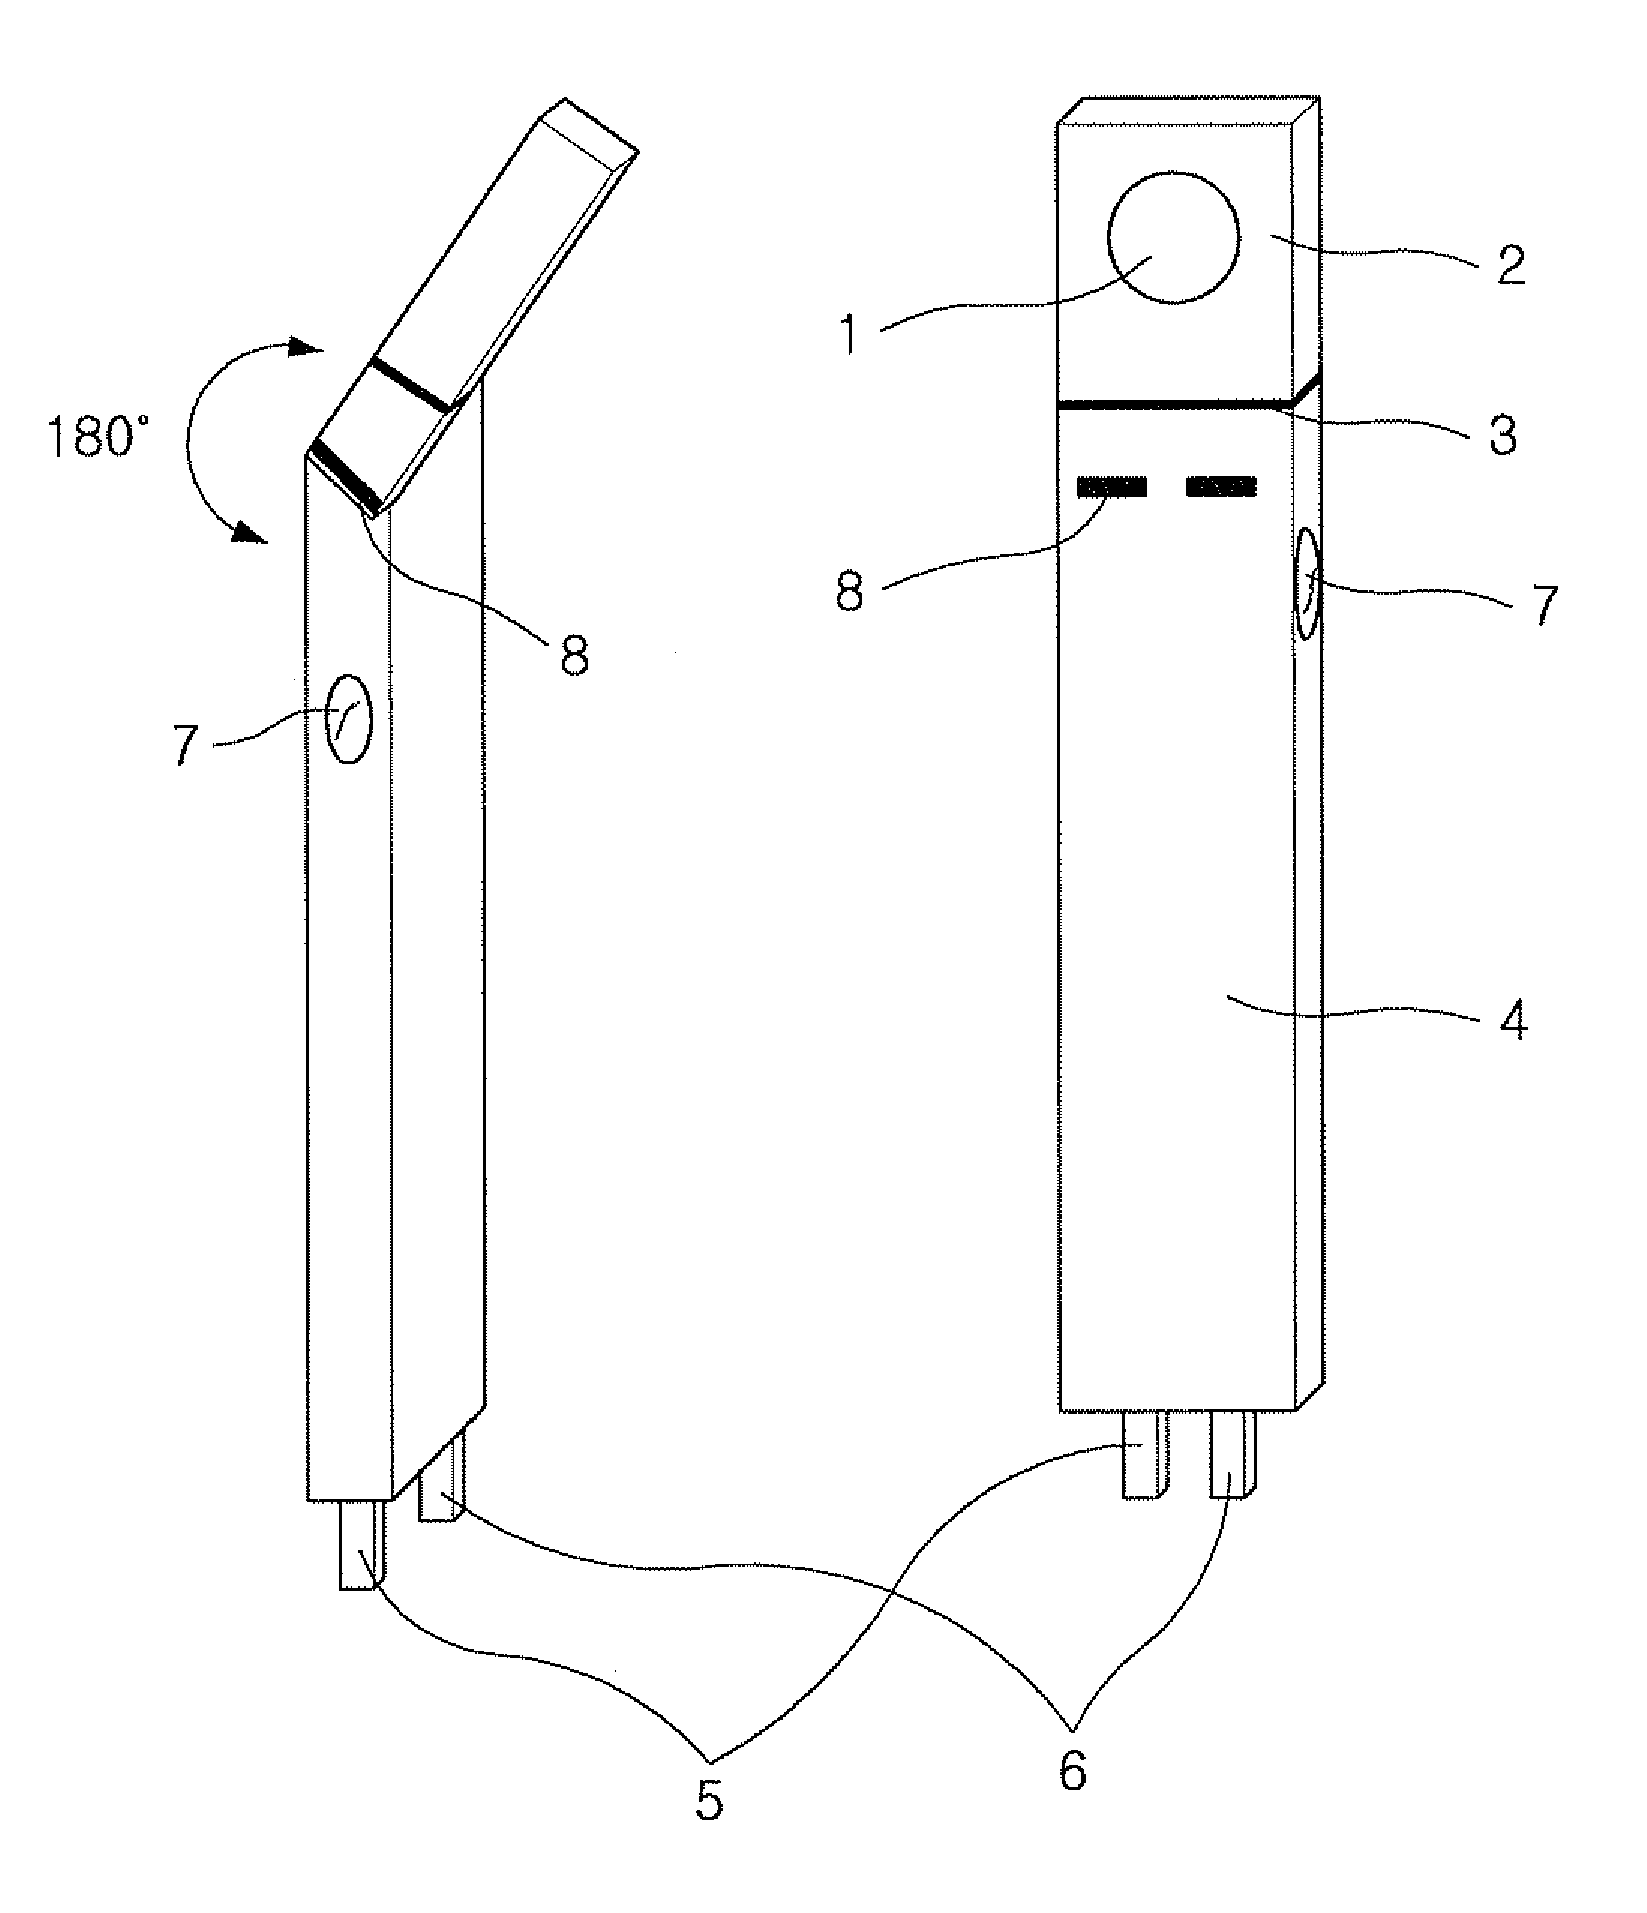 X-ray system for dental diagnosis and oral cancer therapy based on nano-material and method thereof